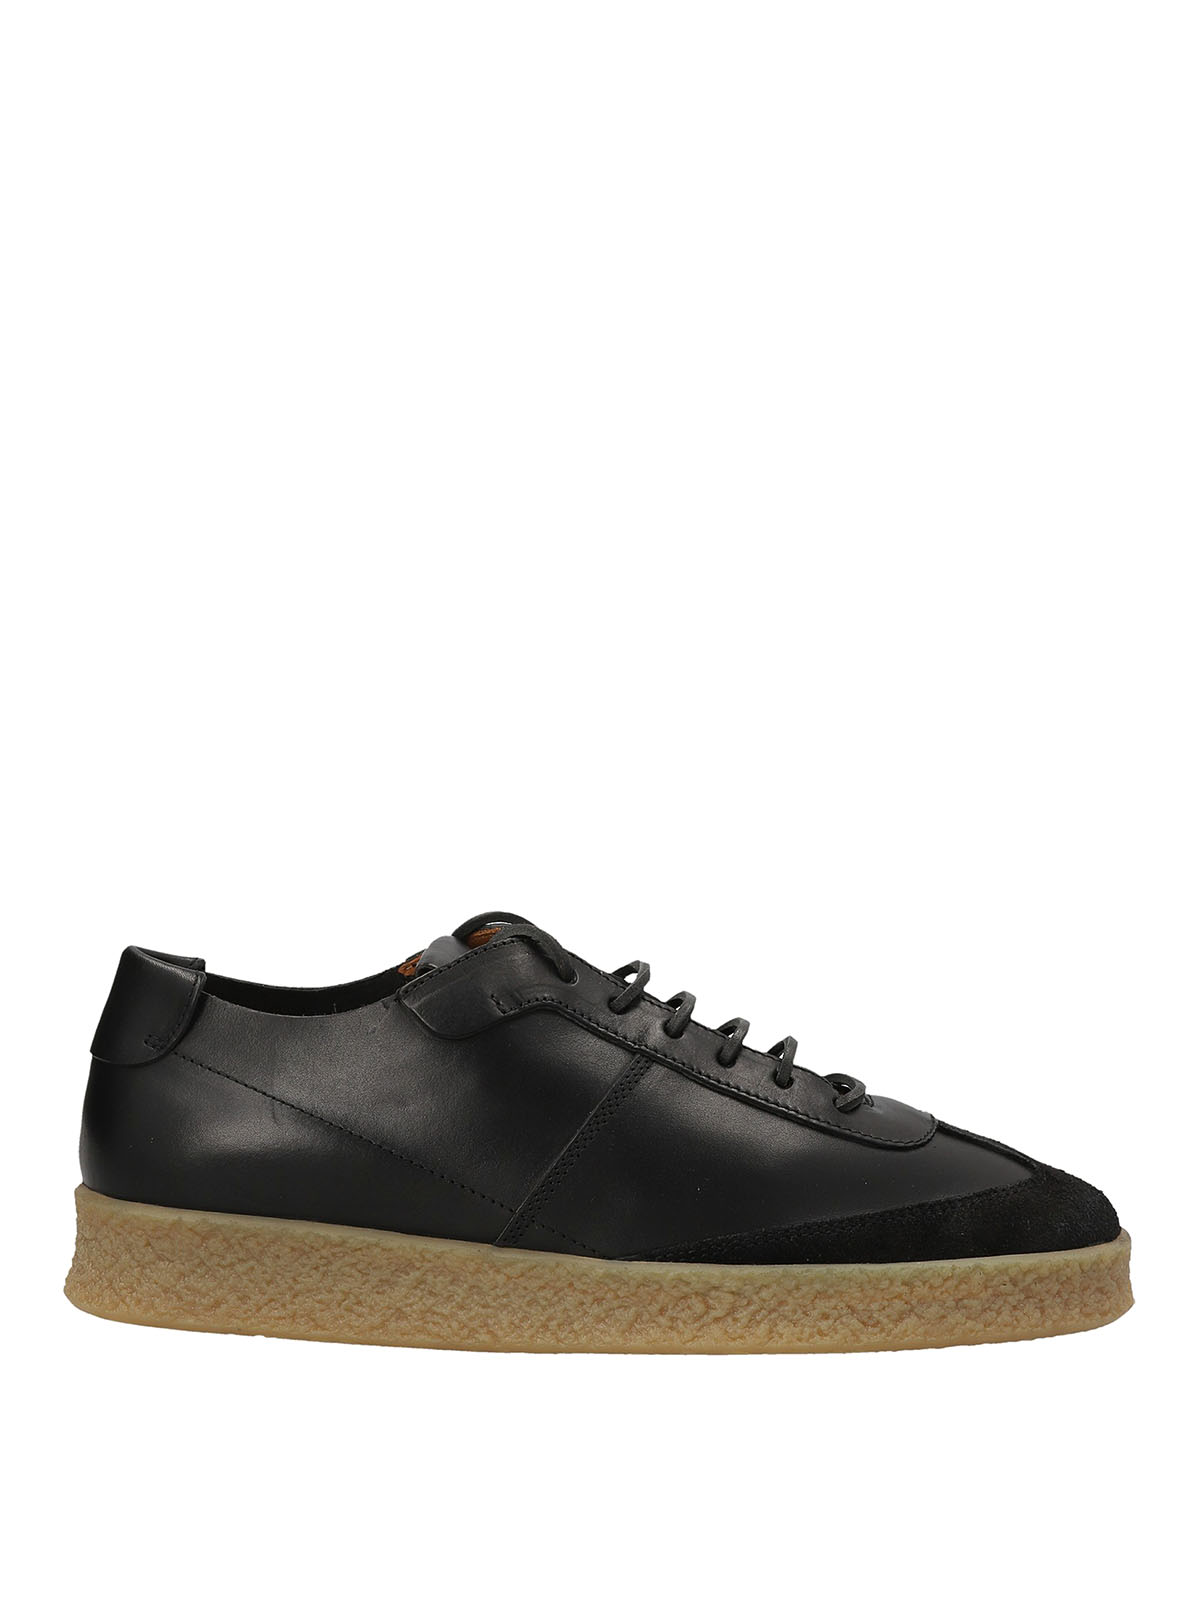 Trainers Buttero - Crespo sneakers - B10220VARC | Shop online at iKRIX